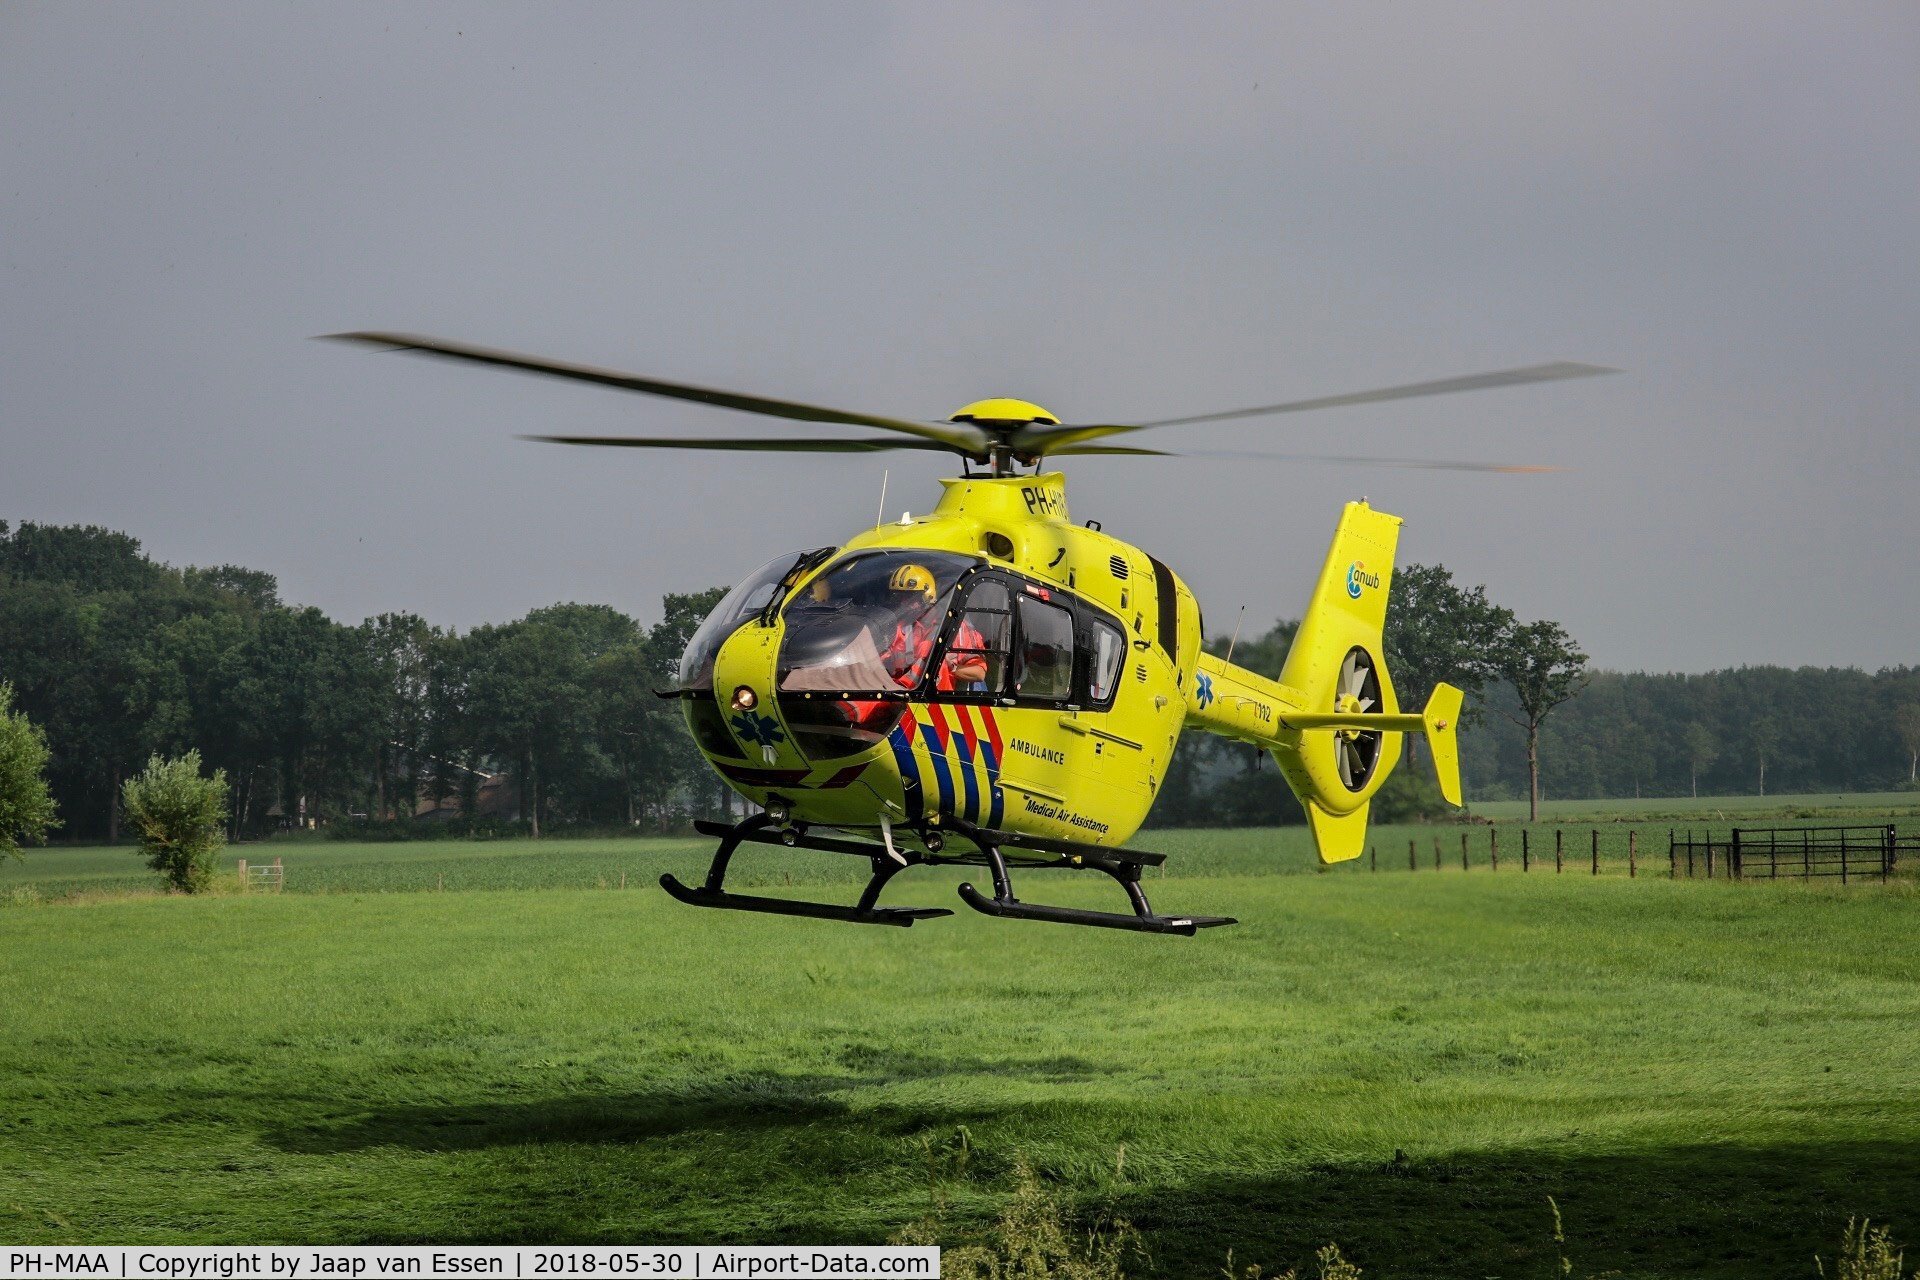 PH-MAA, 2006 Eurocopter EC-135T-2 C/N 0532, PH-MAA is an emergency helicopter in the Netherlands